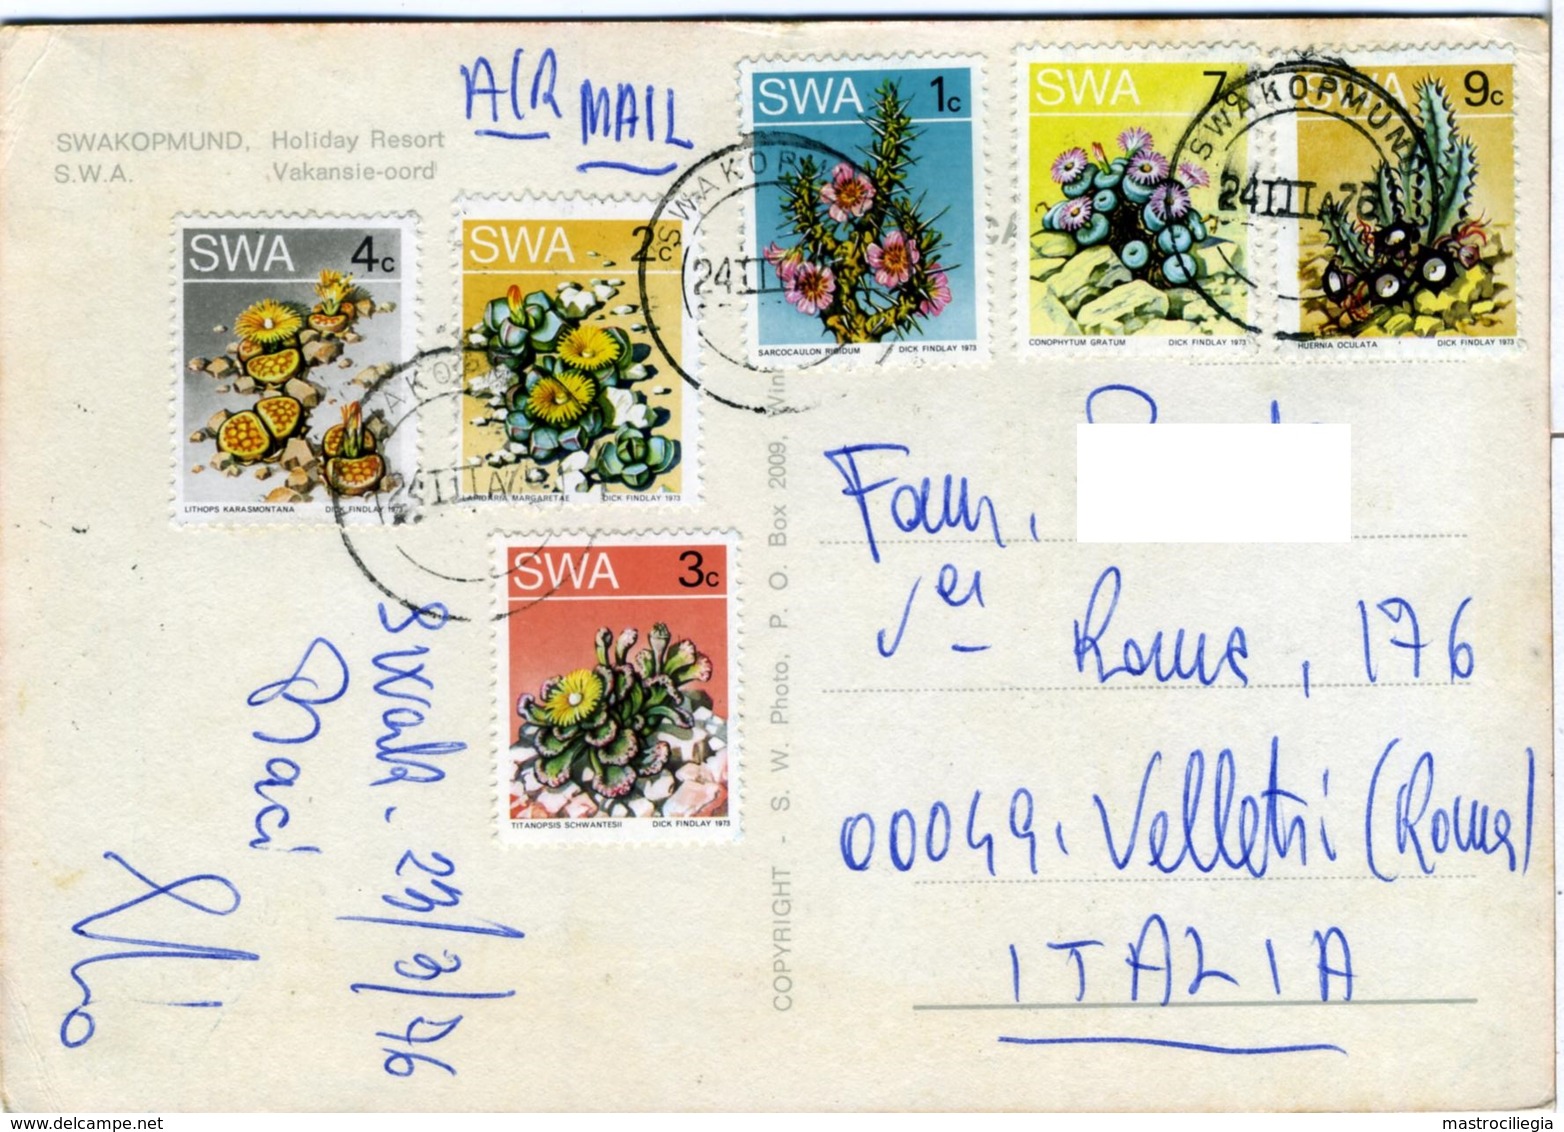 SWA  SOUTH WEST AFRICA  NAMIBIA  SWAKOPMUND  Holiday In..  Multiview Lighthous Phare  6 Nice Stamps Flowers - Namibie